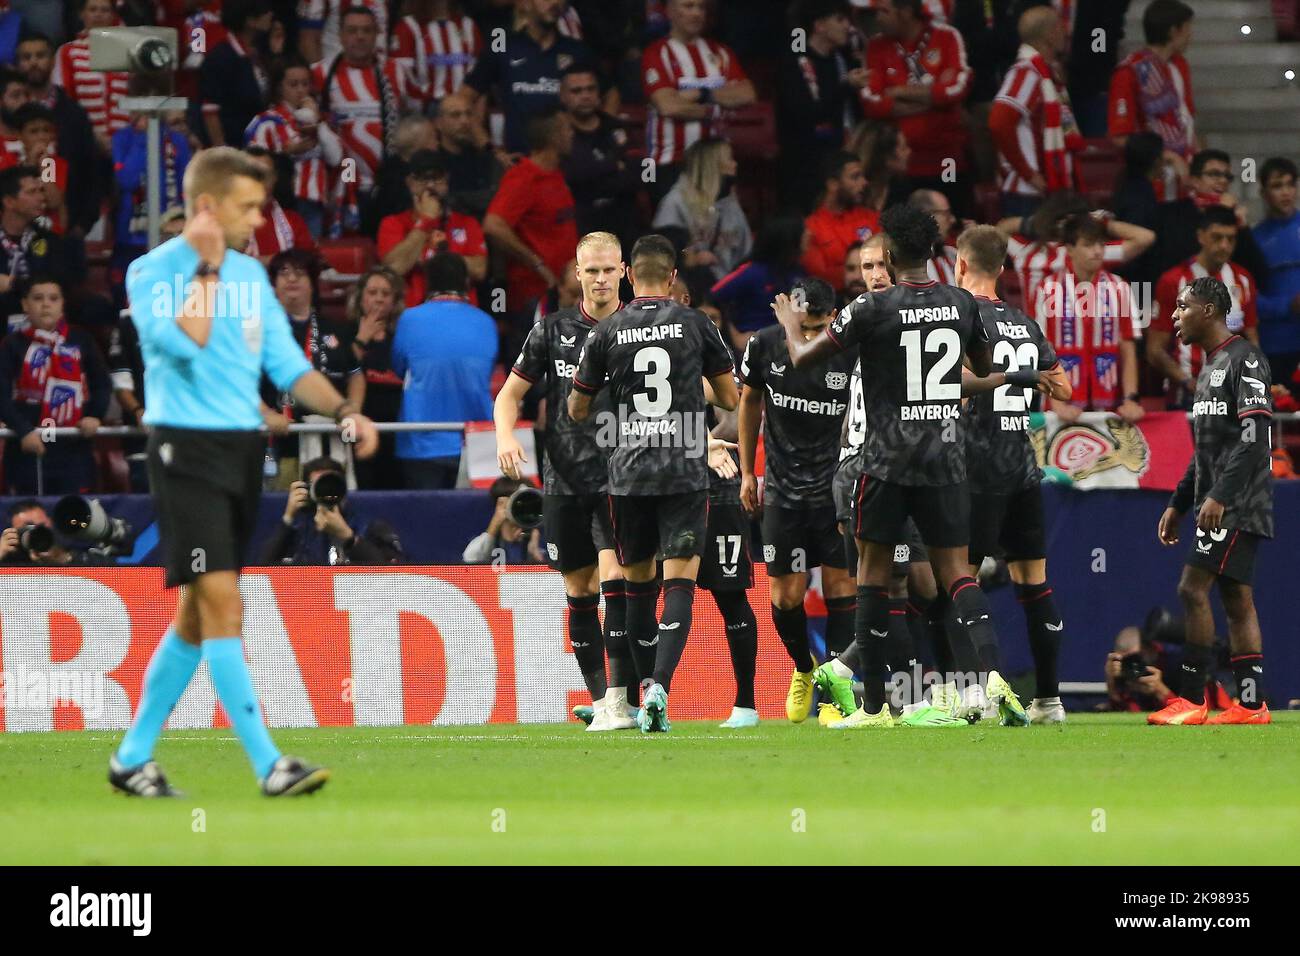 Bayer players celebrate during Champions League Match Day 5 between Atletico de Madrid and Bayern Leverkusen at Civitas Metropolitano Stadium in Madrid, Spain, on October 26, 2022. Stock Photo